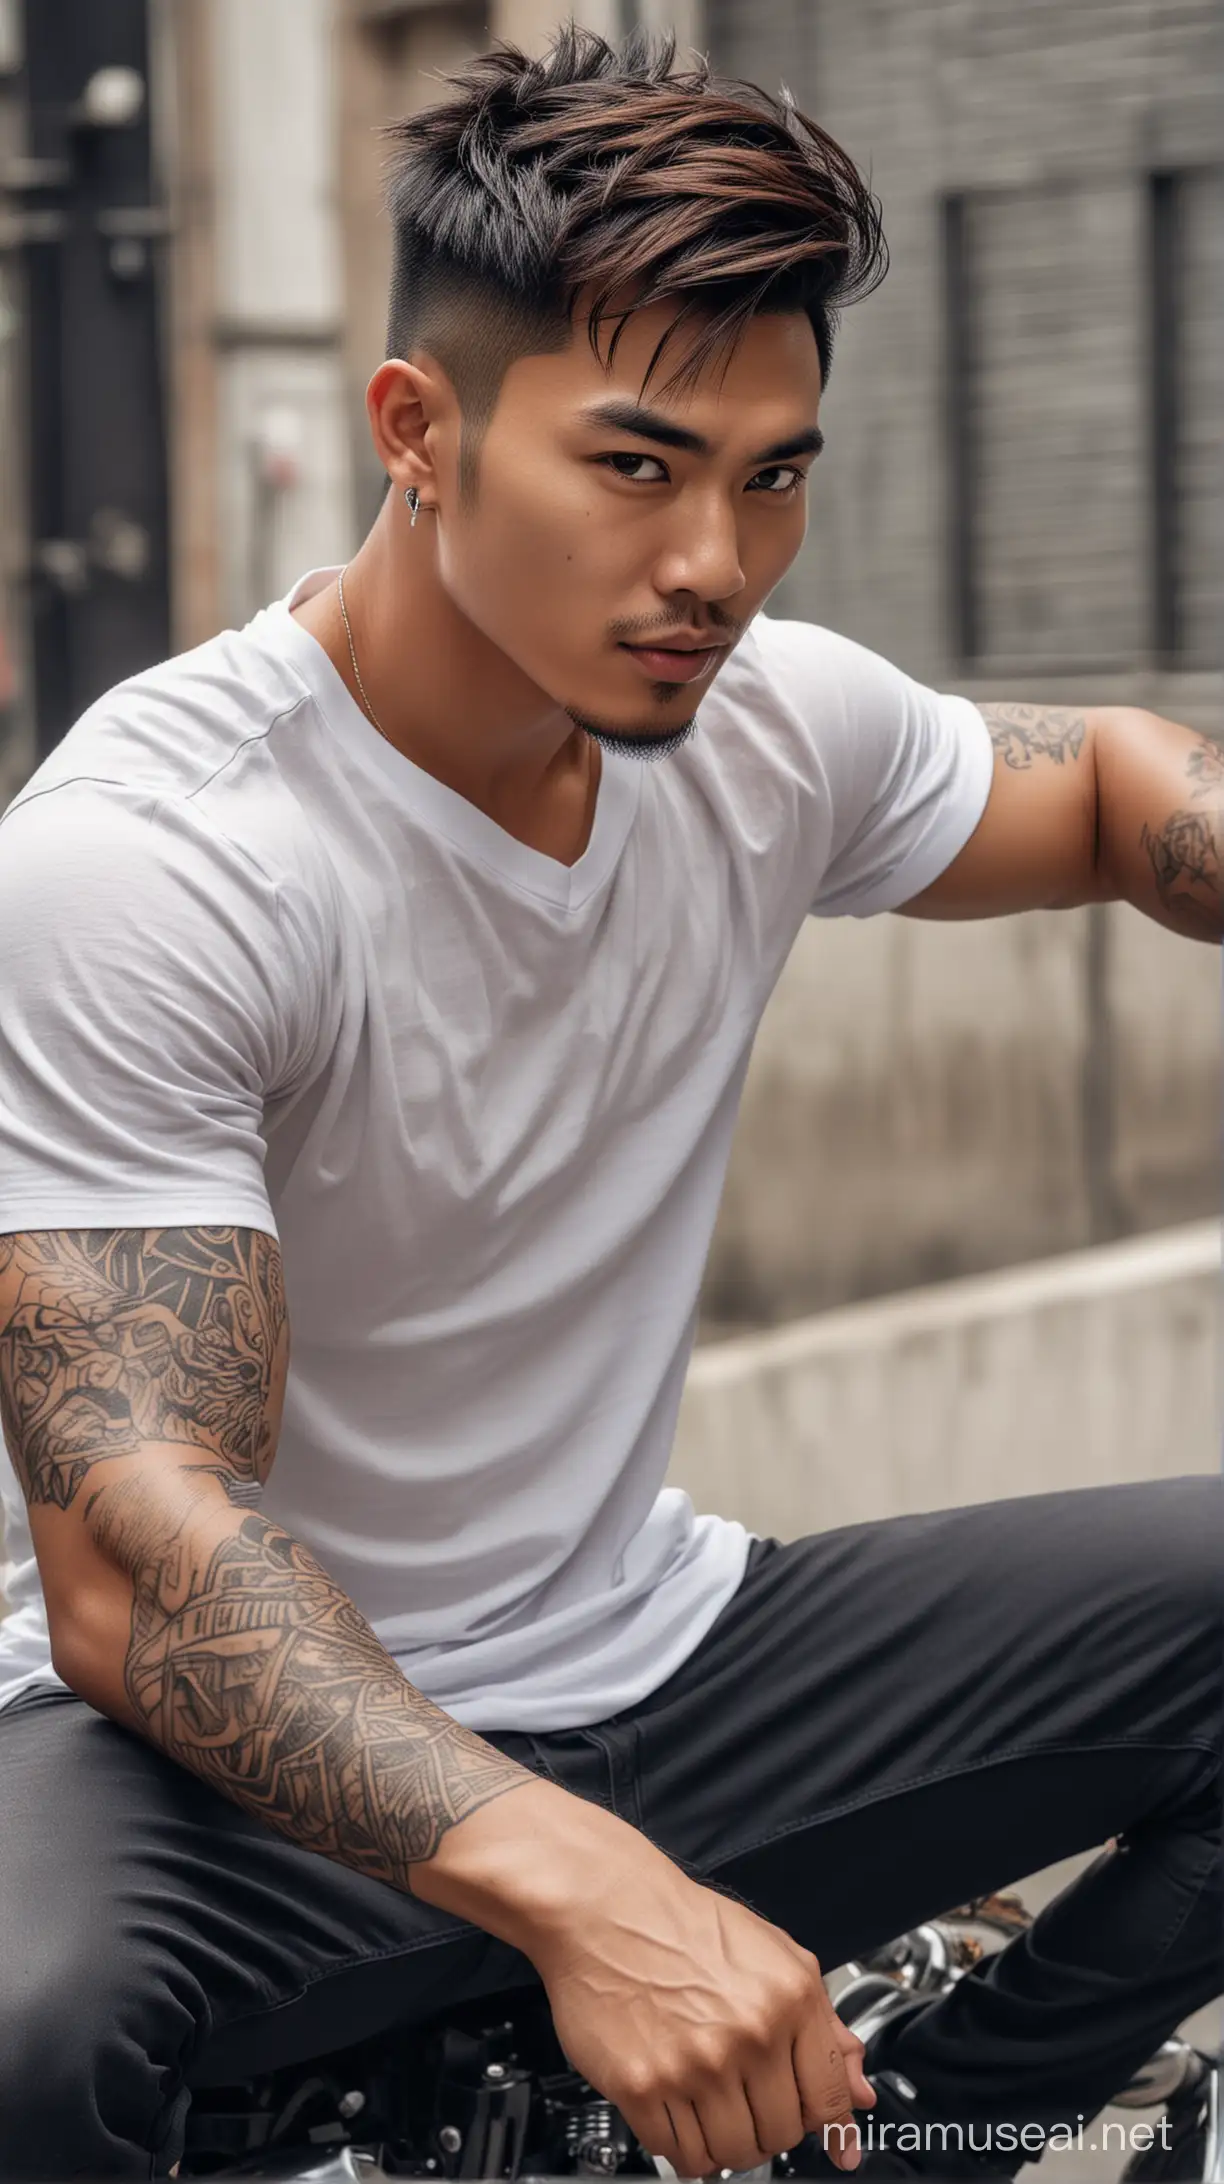 realistic photo of an asian young handsome muscular man, fringe up stylish hair. tatto, with a typikal
Indonesian fave wearing (wearing white lithe a V-neck t-shirt which has dark color also on t-shirt. t-shirt have reverse color differences, white sketch shoes. Sitting on the Ninja sport motorcicle black pointing cool posing at the camera. Jakarta city street background